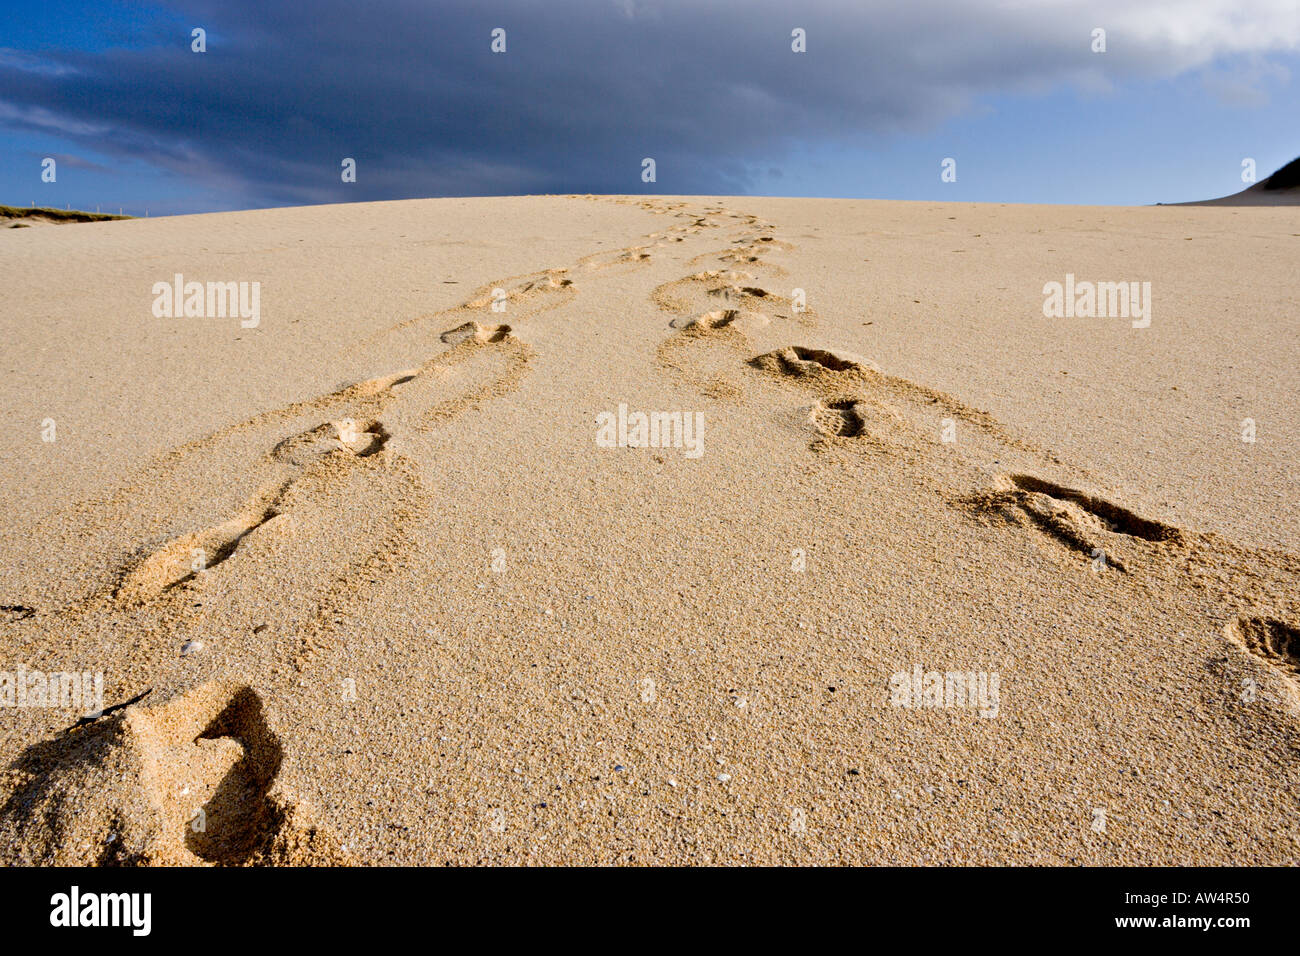 Two sets of footprints disappearing over the crest of a sand dune Stock Photo